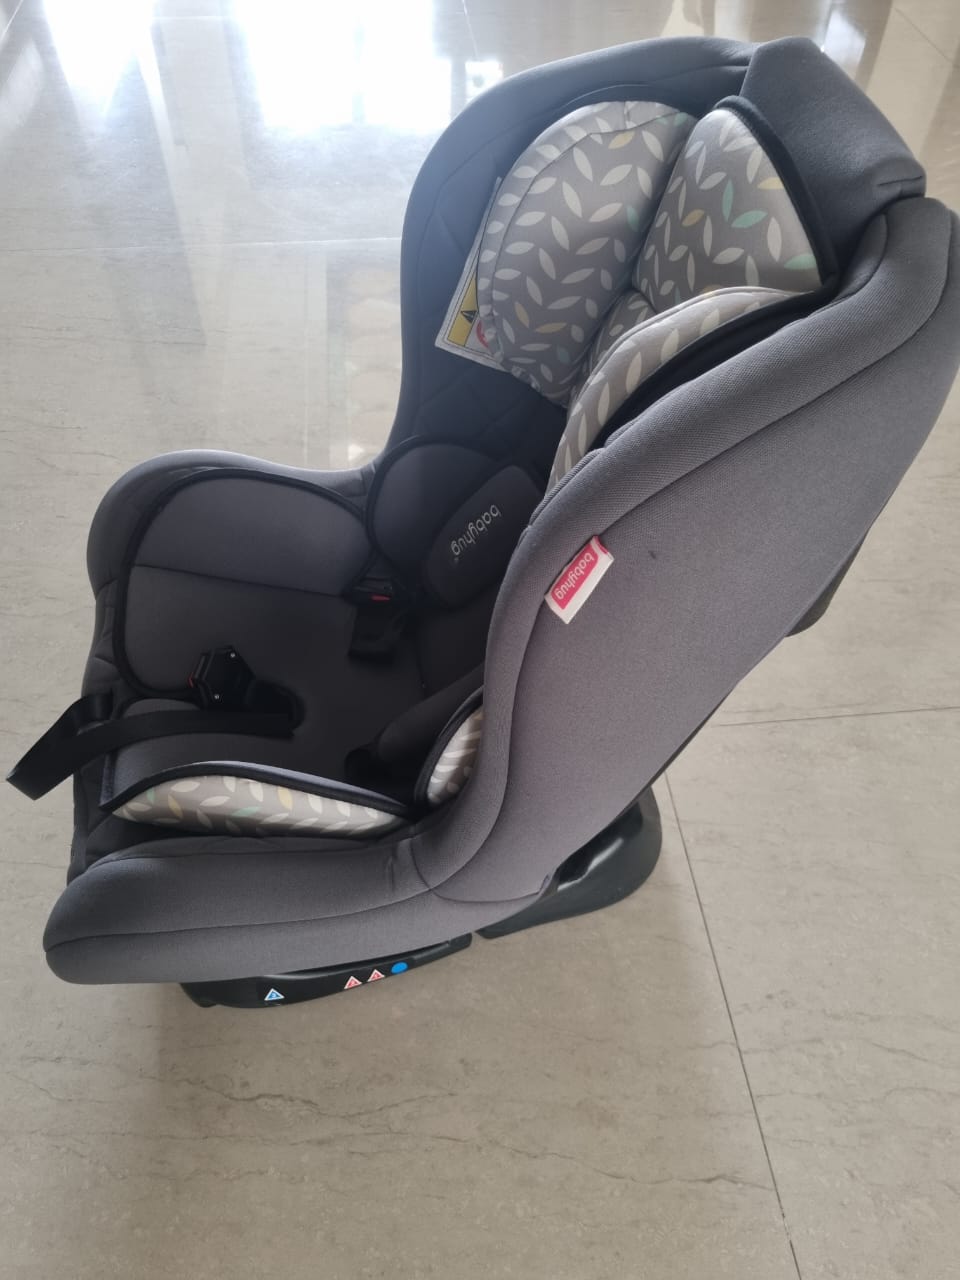 Babyhug Expedition 3 in 1 Convertible Car Seat